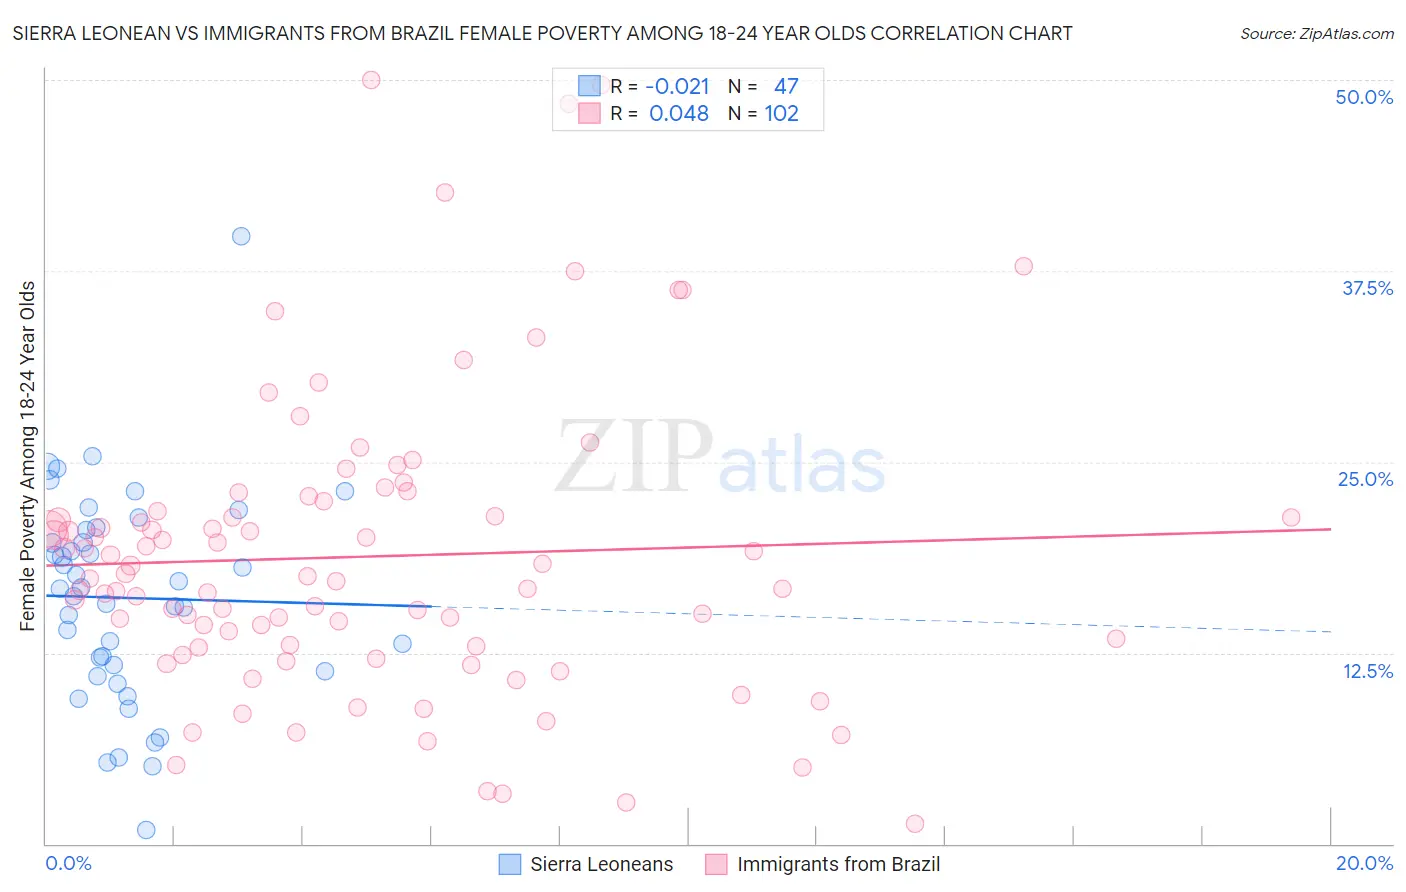 Sierra Leonean vs Immigrants from Brazil Female Poverty Among 18-24 Year Olds